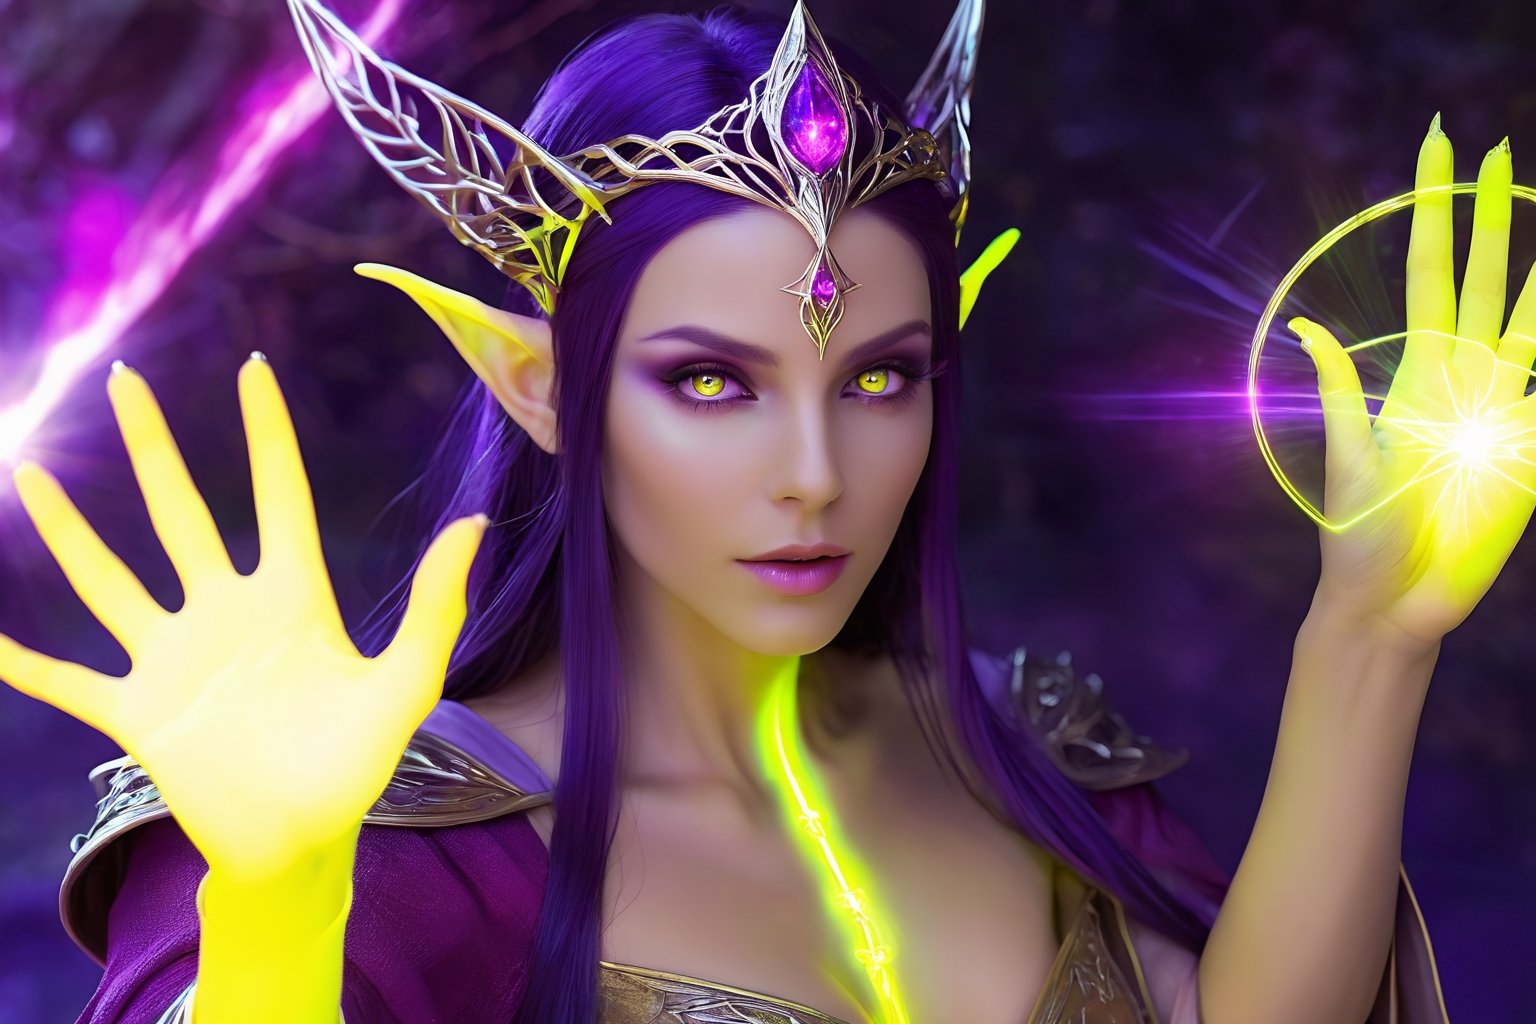 This beautiful elven sorceress whose laser eyes glow neon yellow, glowing purple spell energy in her hand